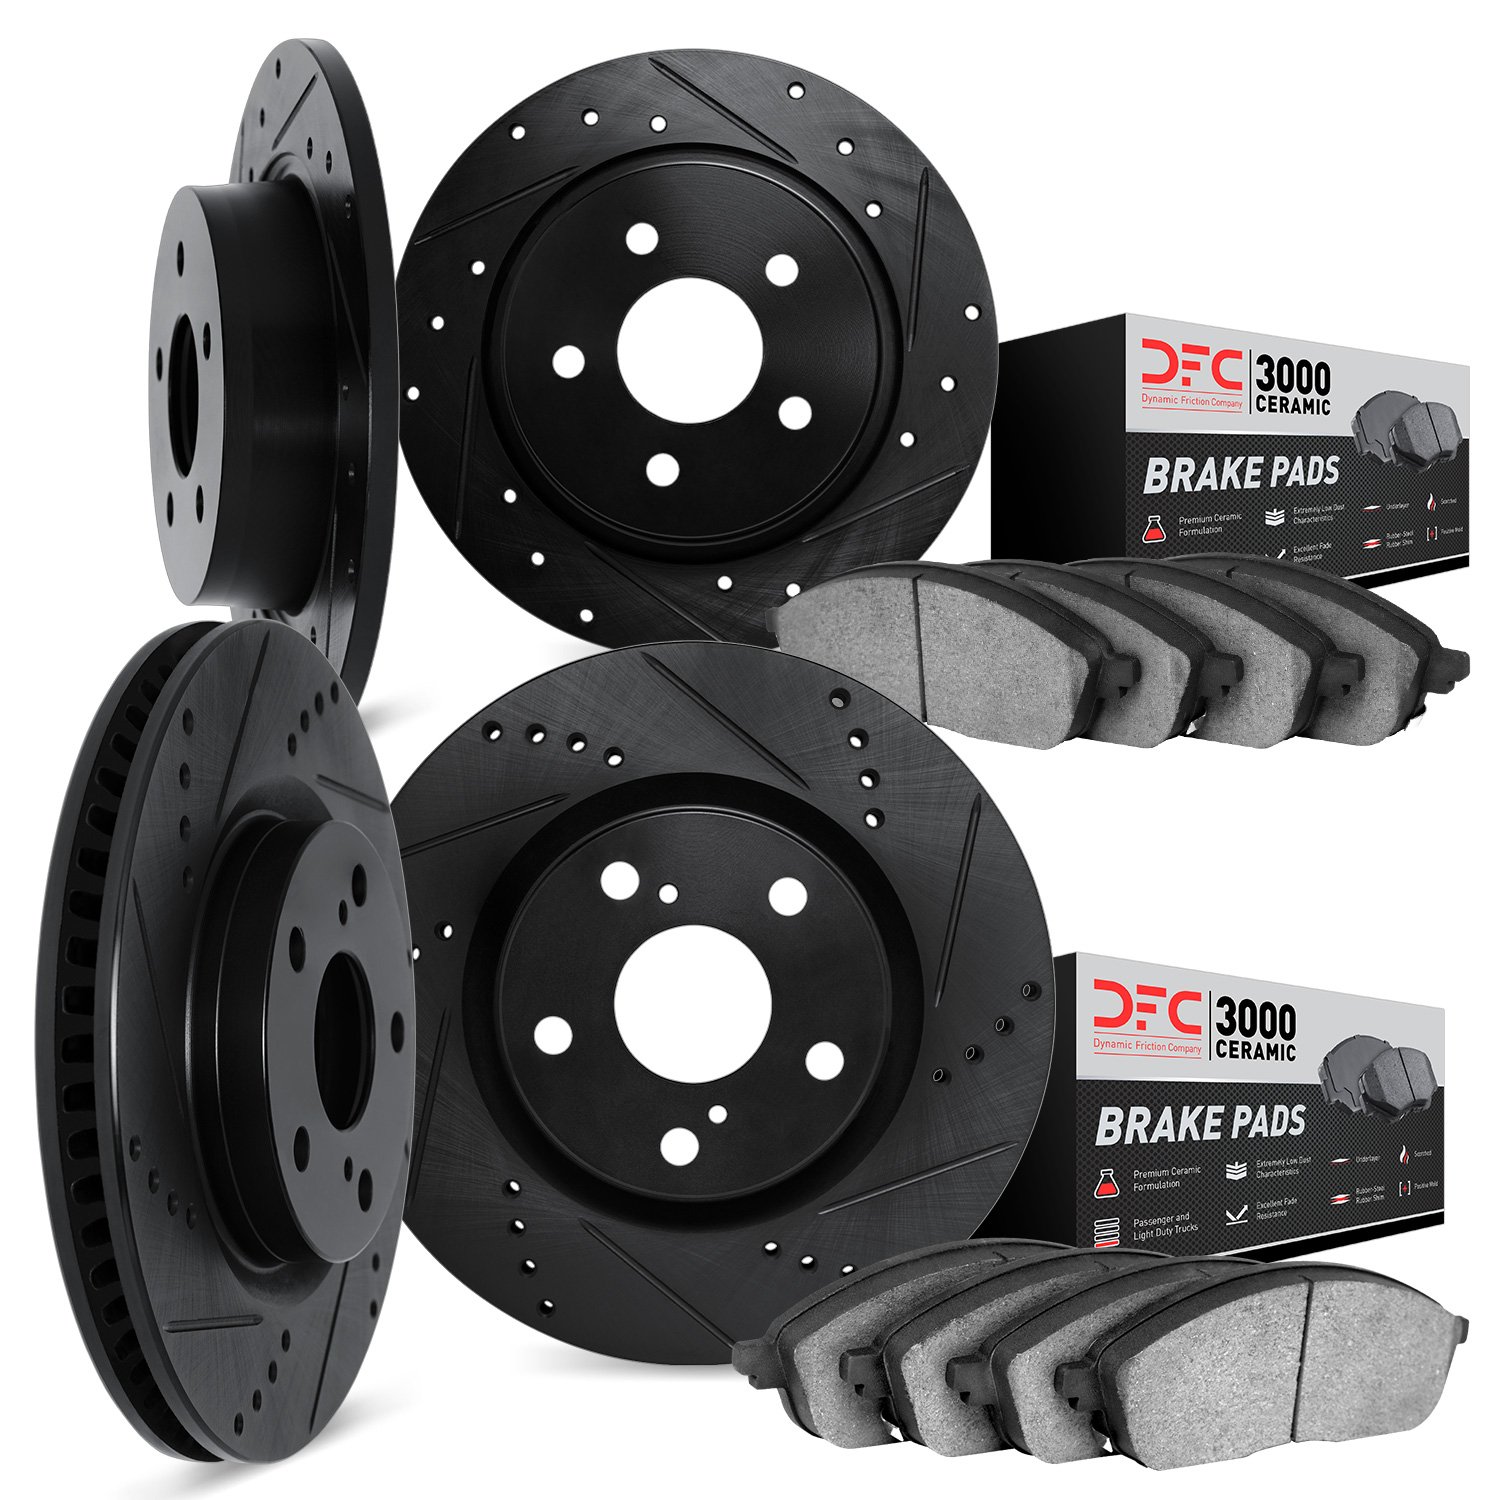 8304-40011 Drilled/Slotted Brake Rotors with 3000-Series Ceramic Brake Pads Kit [Black], 1993-1997 Mopar, Position: Front and Re